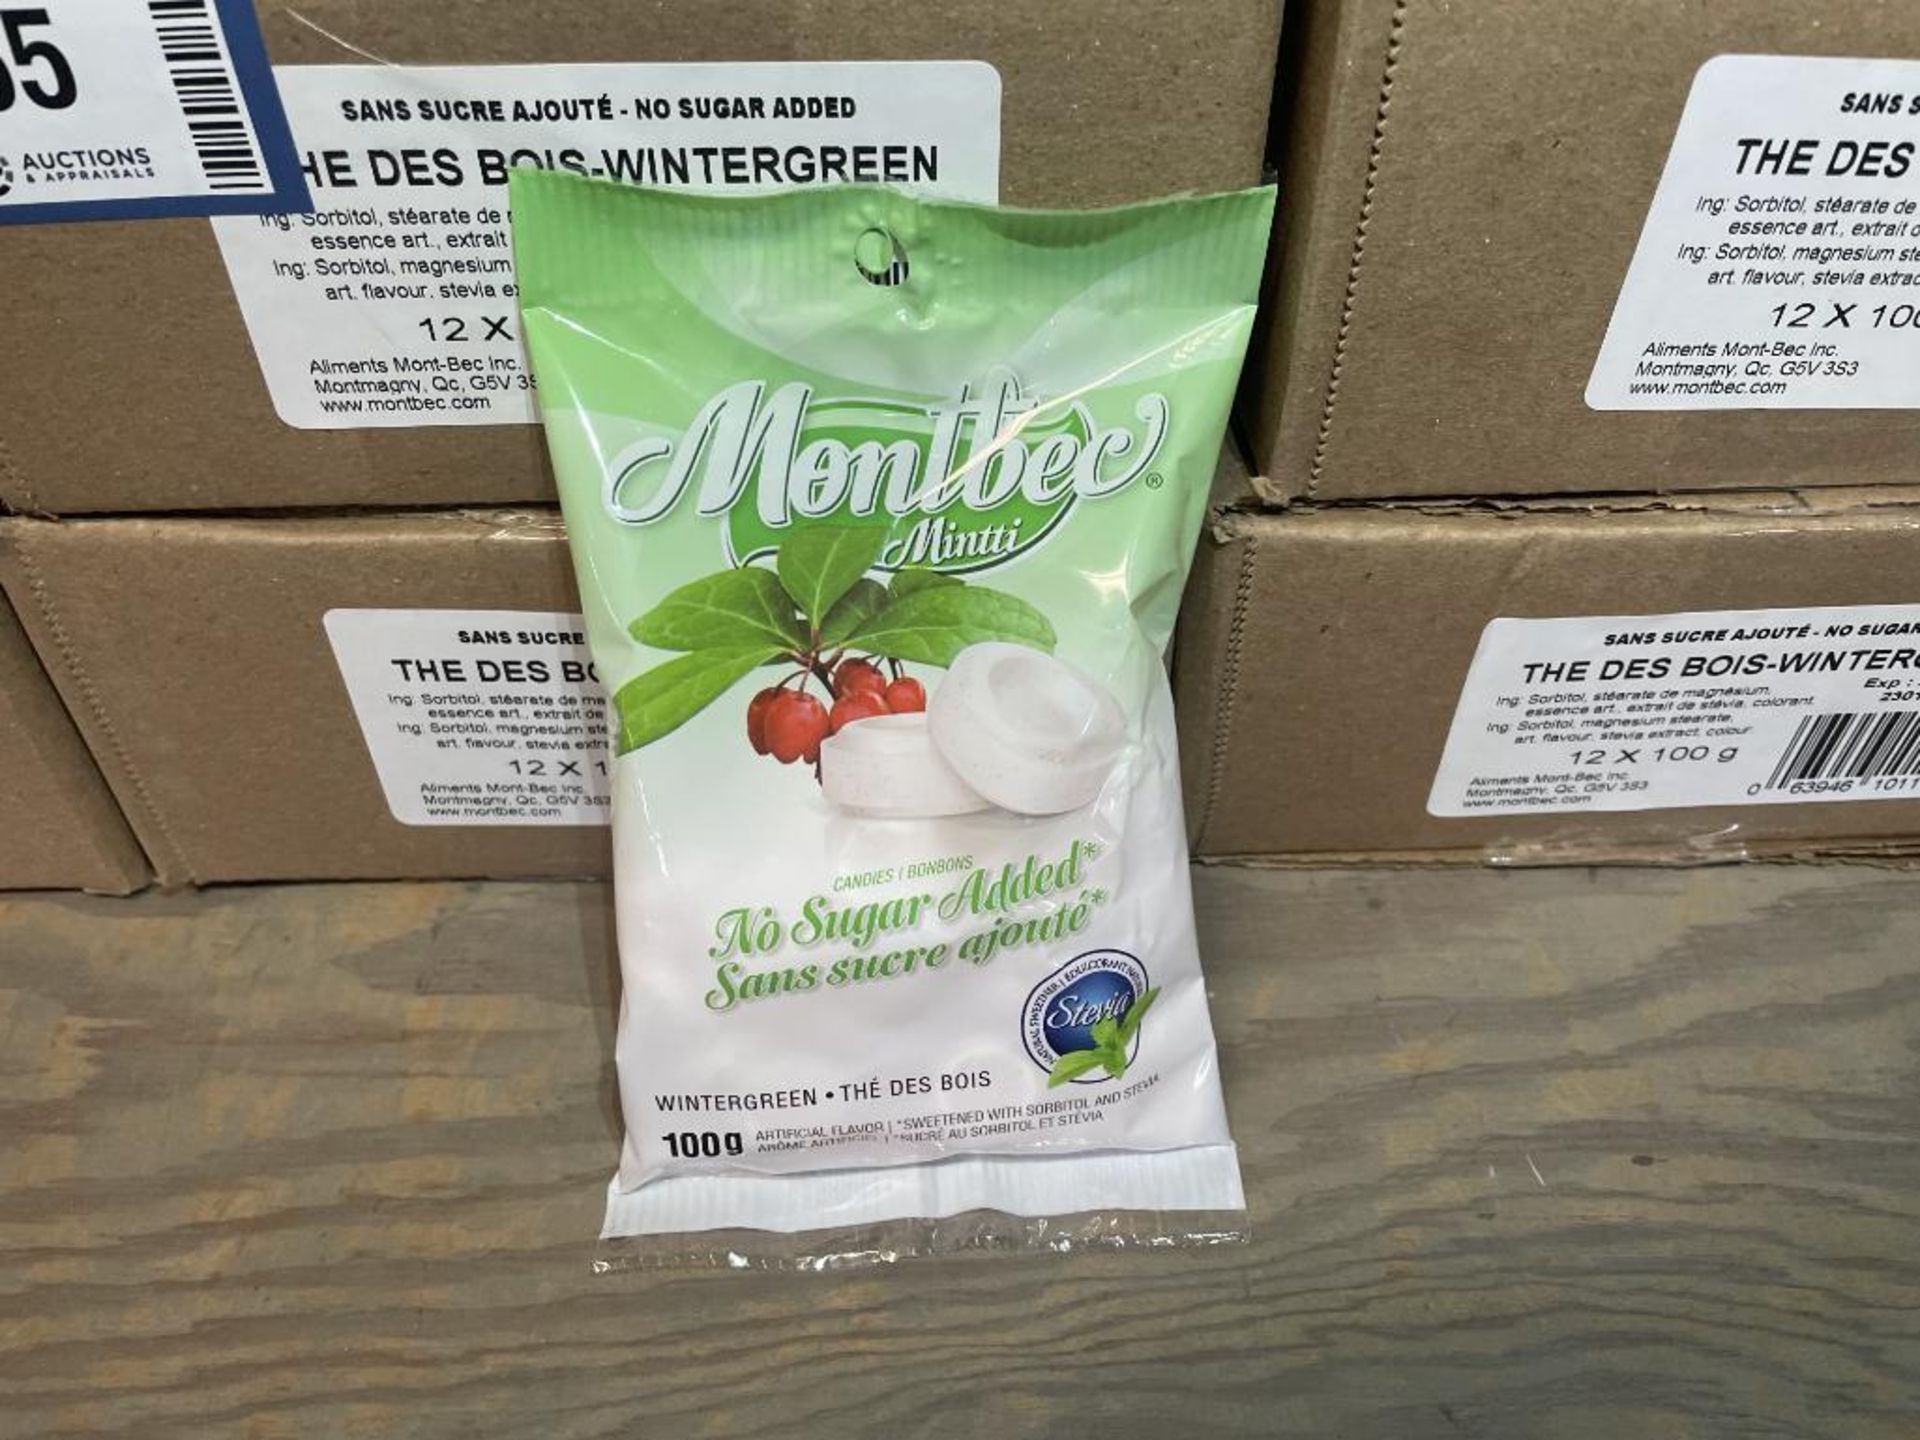 (6) CASES OF MONTBEC NO SUGAR ADDED WINTERGREEN MINTS, 12/100G PER CASE - Image 2 of 3